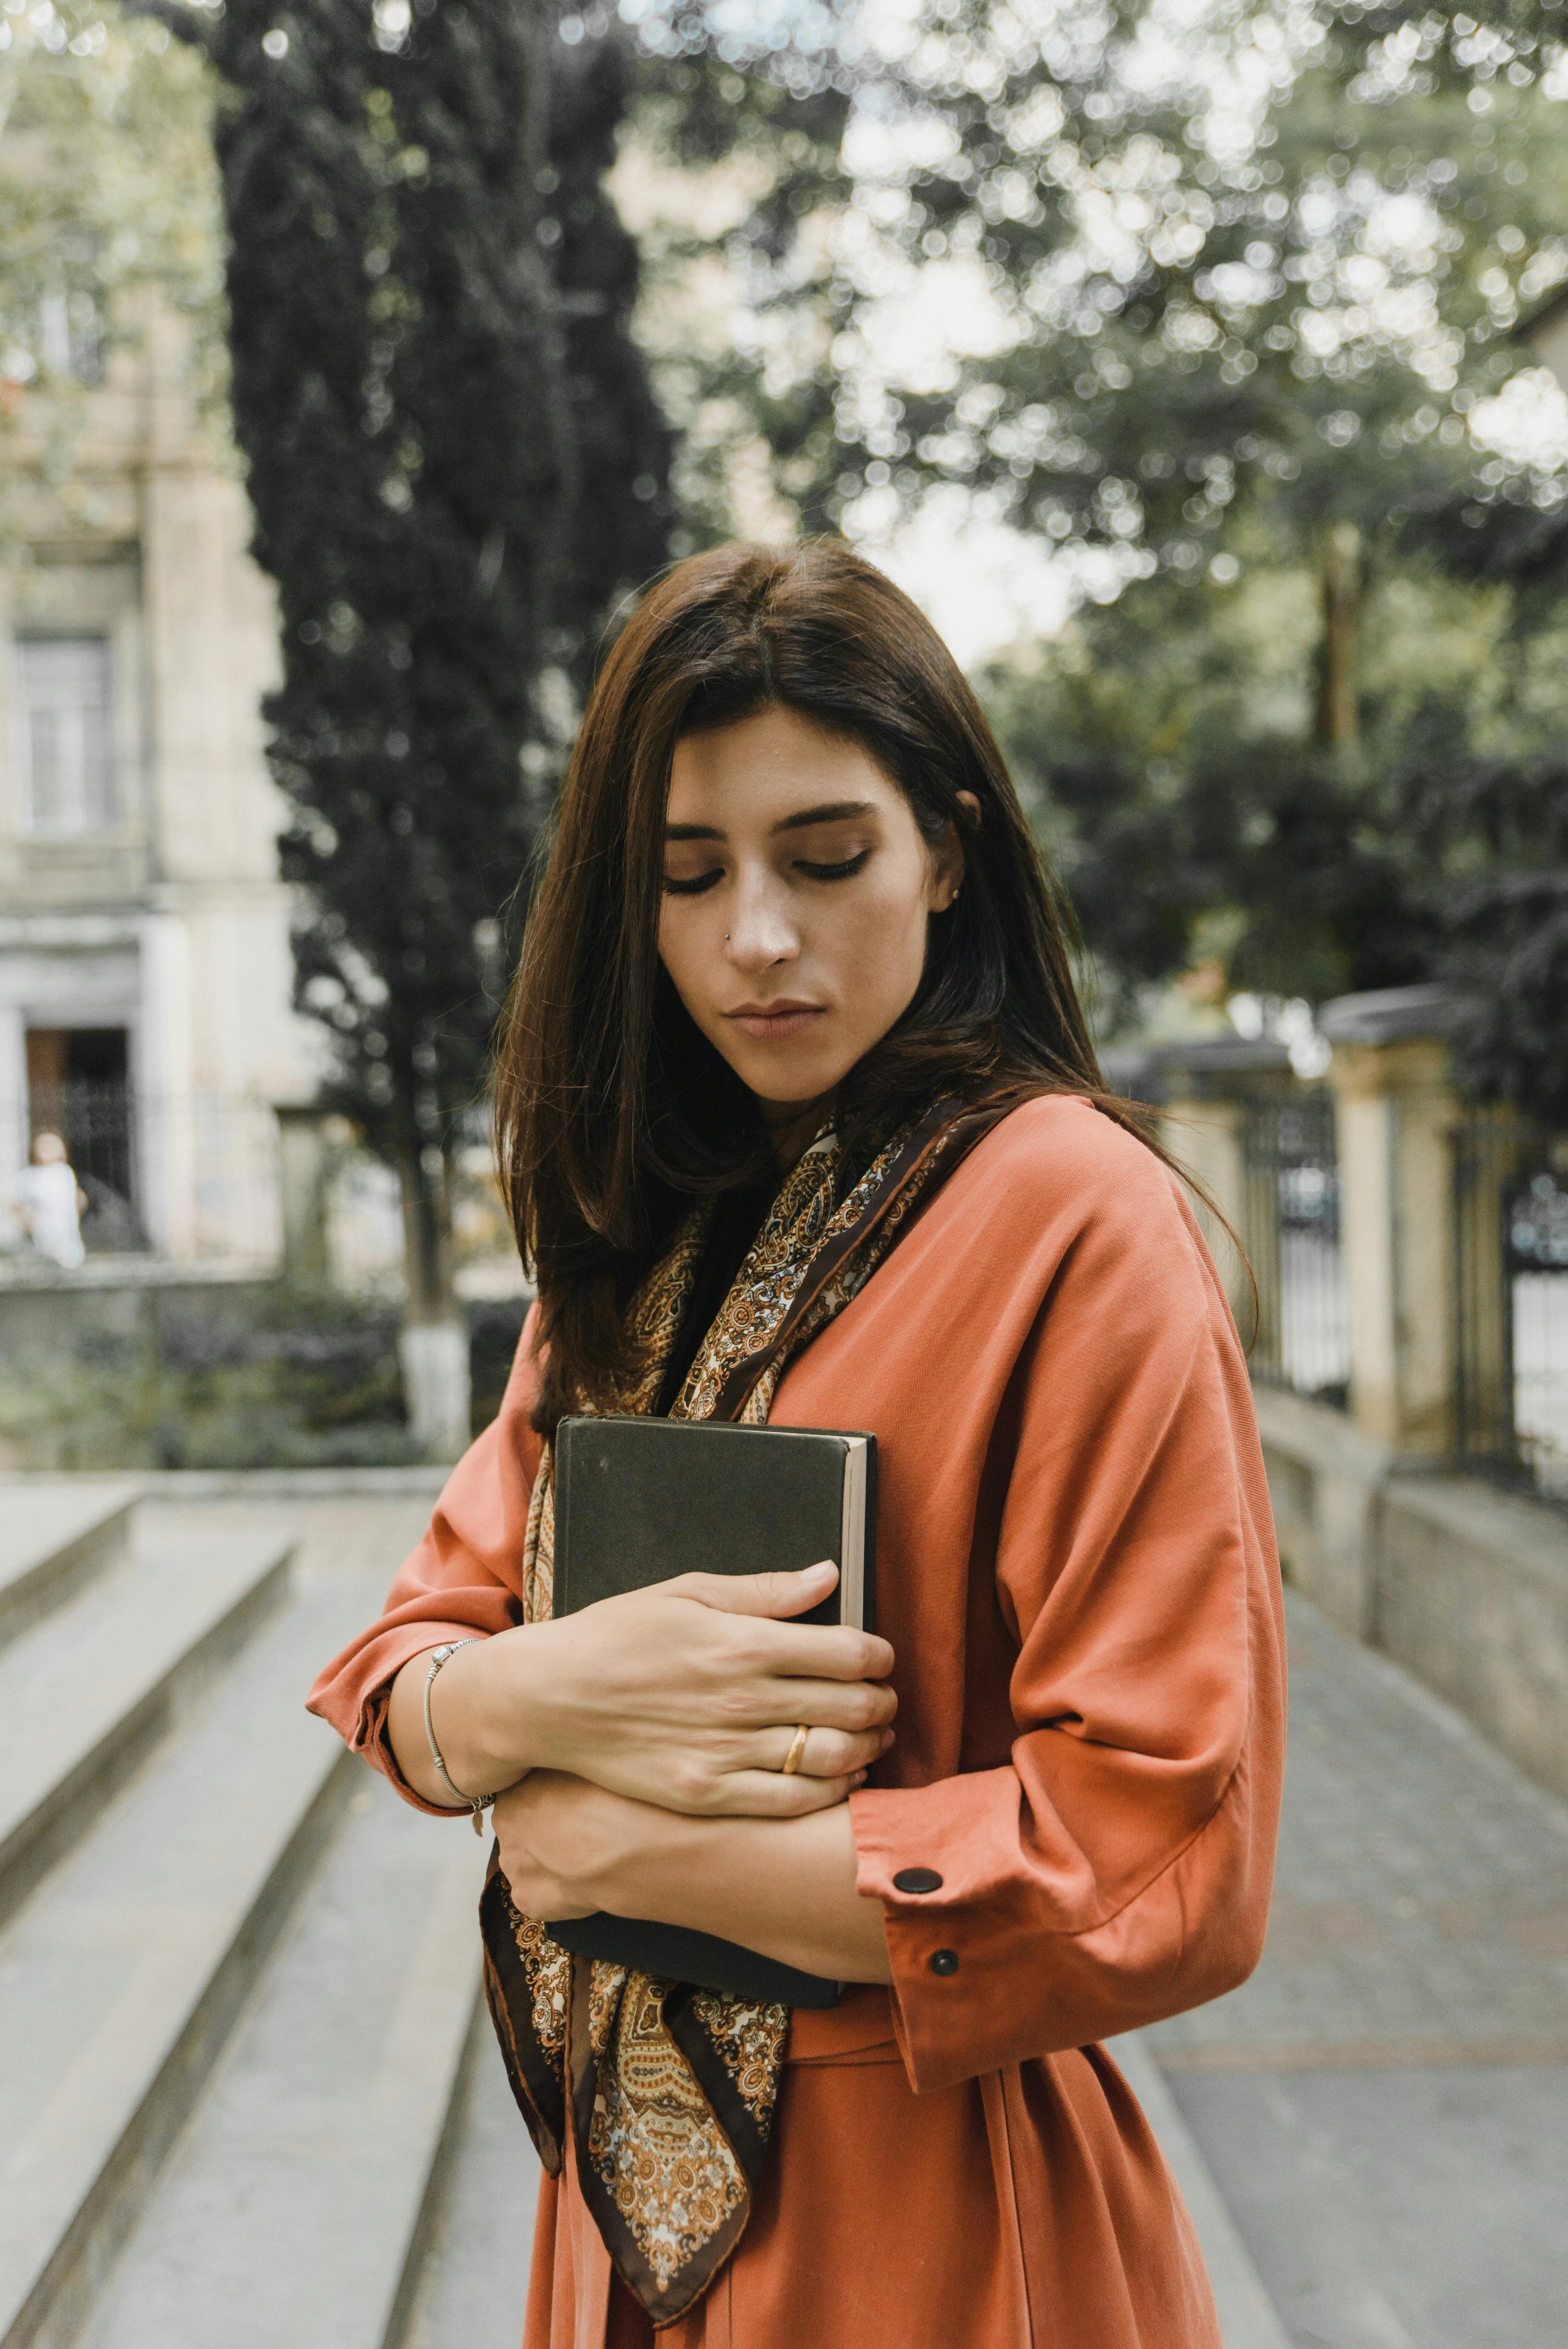 A sad woman looking down while holding a book | Source: Pexels